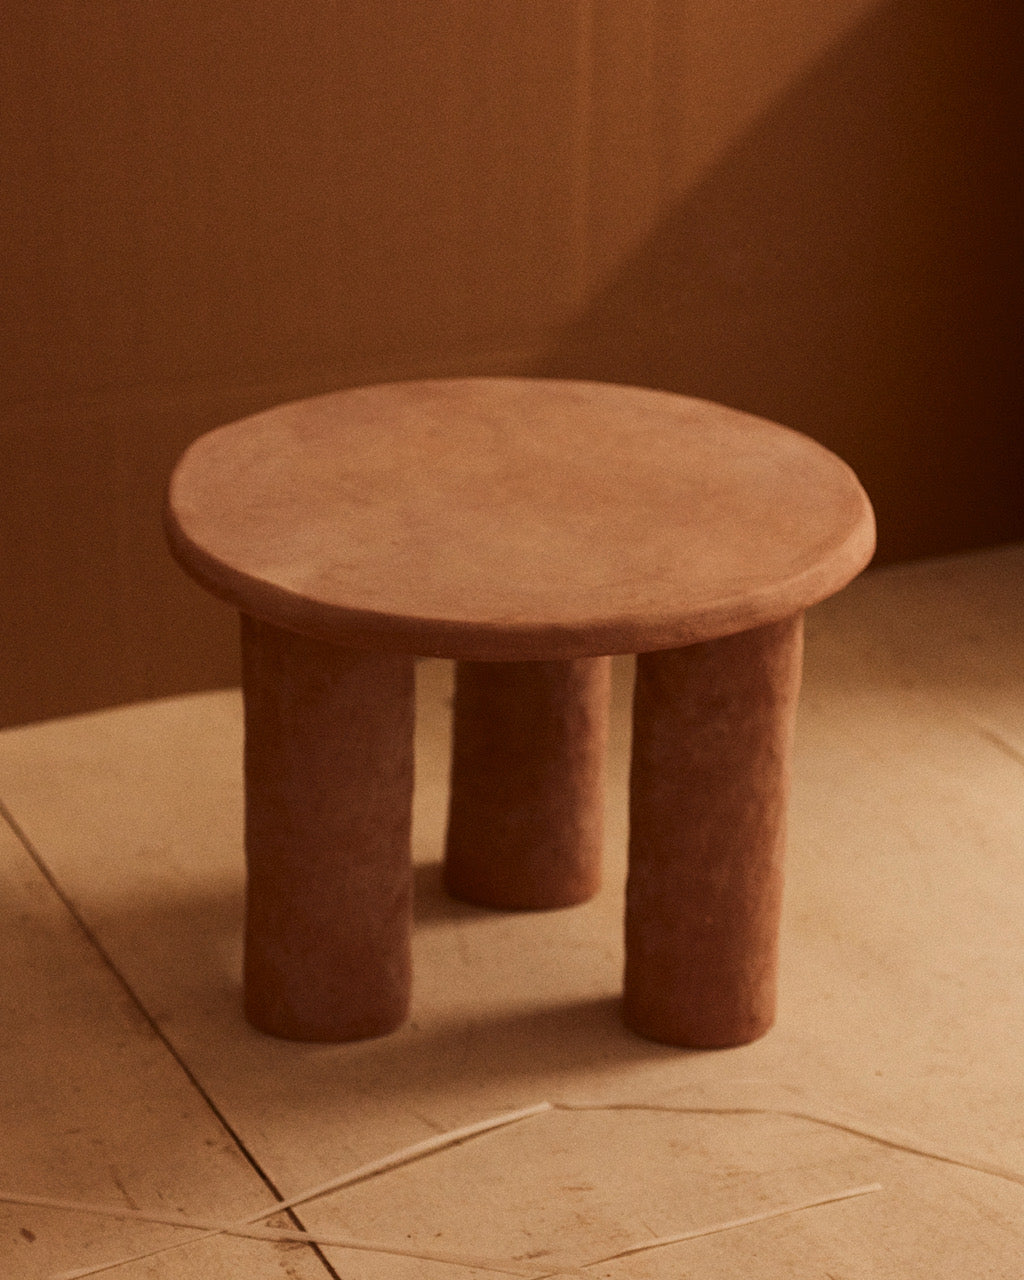 F. II. Ceramic Accent Table. One-of-a-kind. Round ceramic end table with a sculptural, hand-formed appearance in natural clay stoneware by Spanish artist Marta Bonilla.